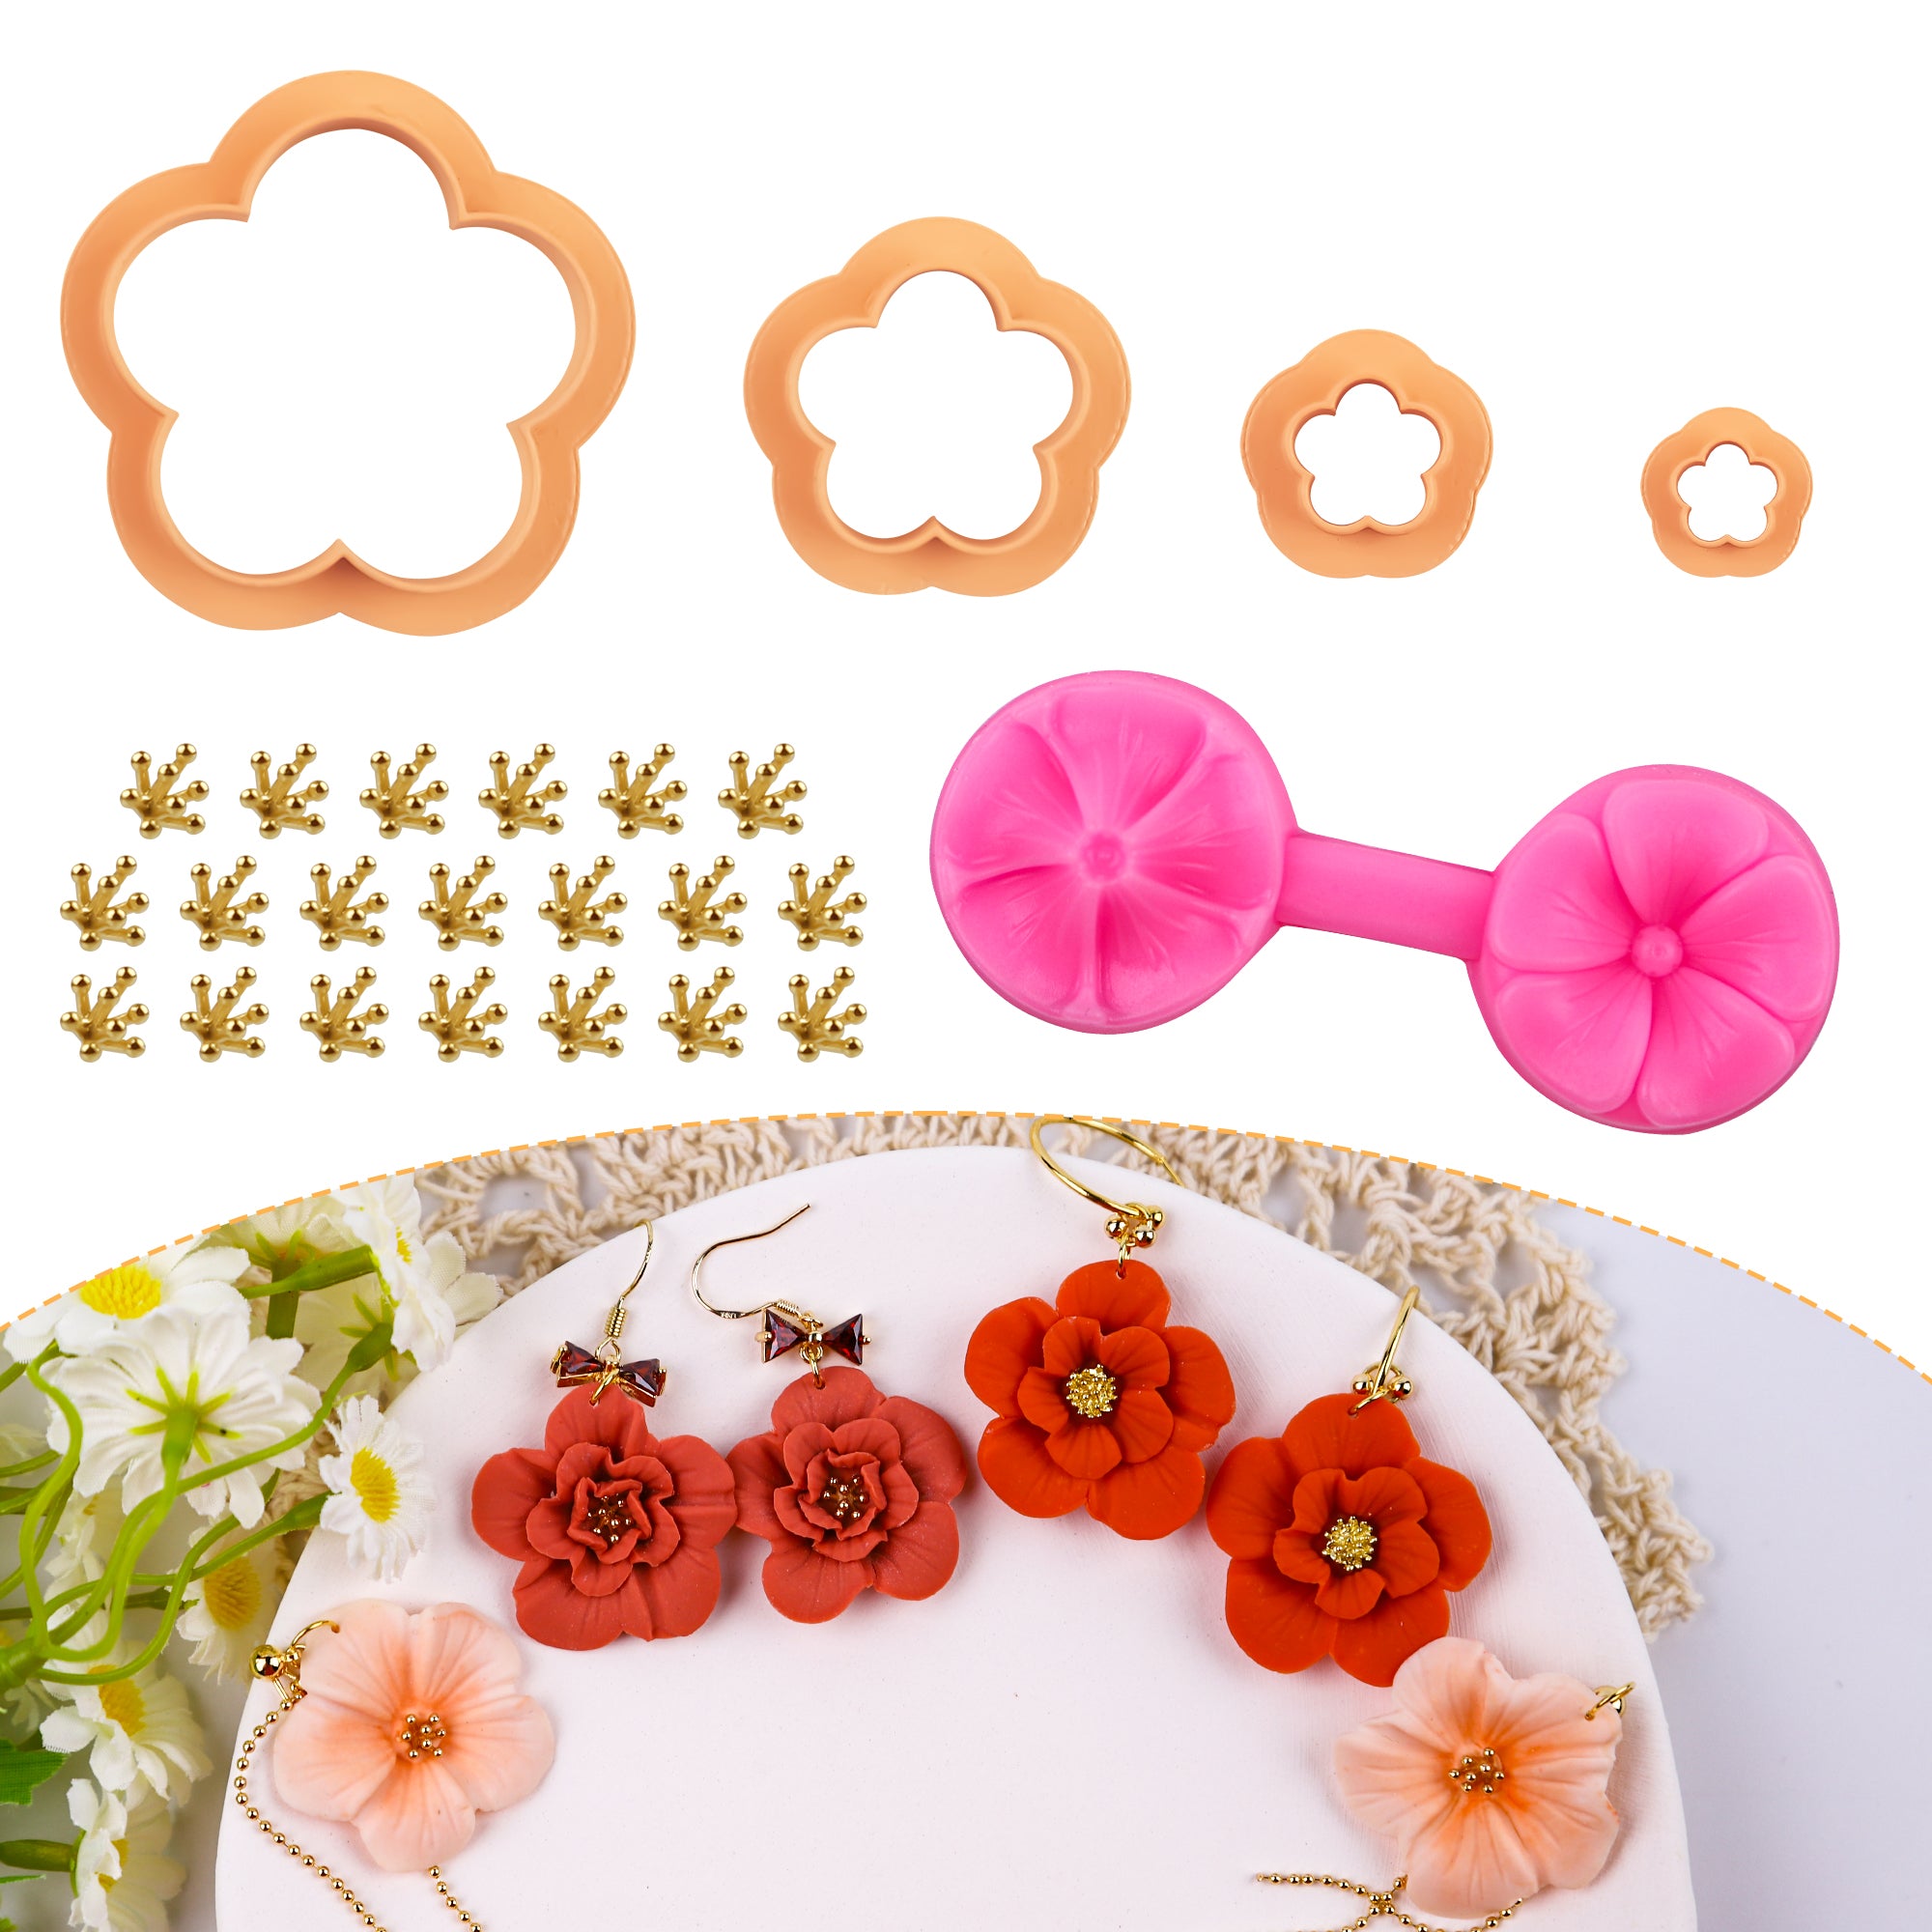  Puocaon Transfer Paper for Polymer Clay, 20 Pcs Fruit Clay  Transfer Paper for Polymer Clay Earrings, Mango Strawberry Transfer Paper  for Polymer Clay Jewelry, Mini Flower Leaves Clay Transfer Sheets 